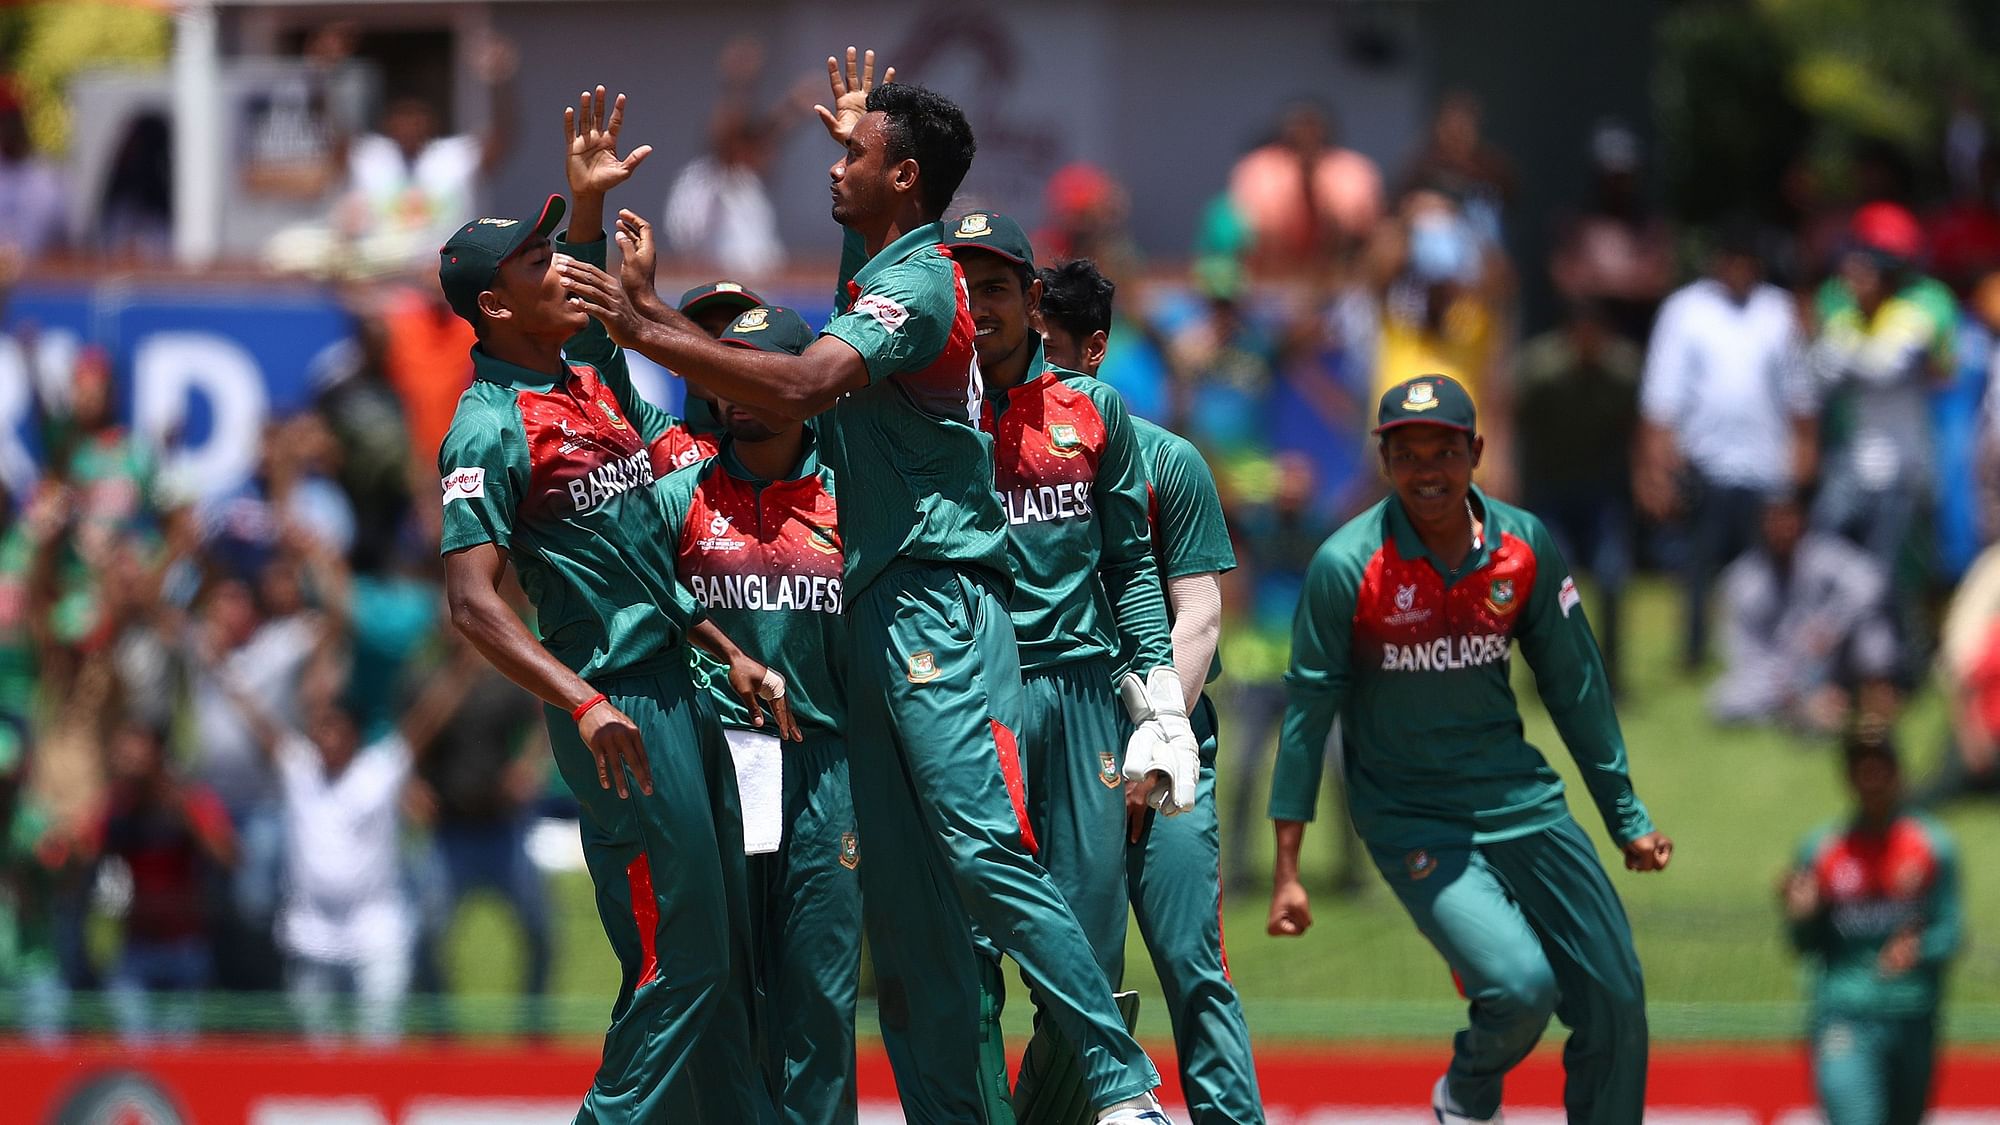 Bangladesh beat the Indian colts by three wickets (via DLS) at the Senwes Park on Sunday to lift their maiden ICC U-19 World Cup trophy.